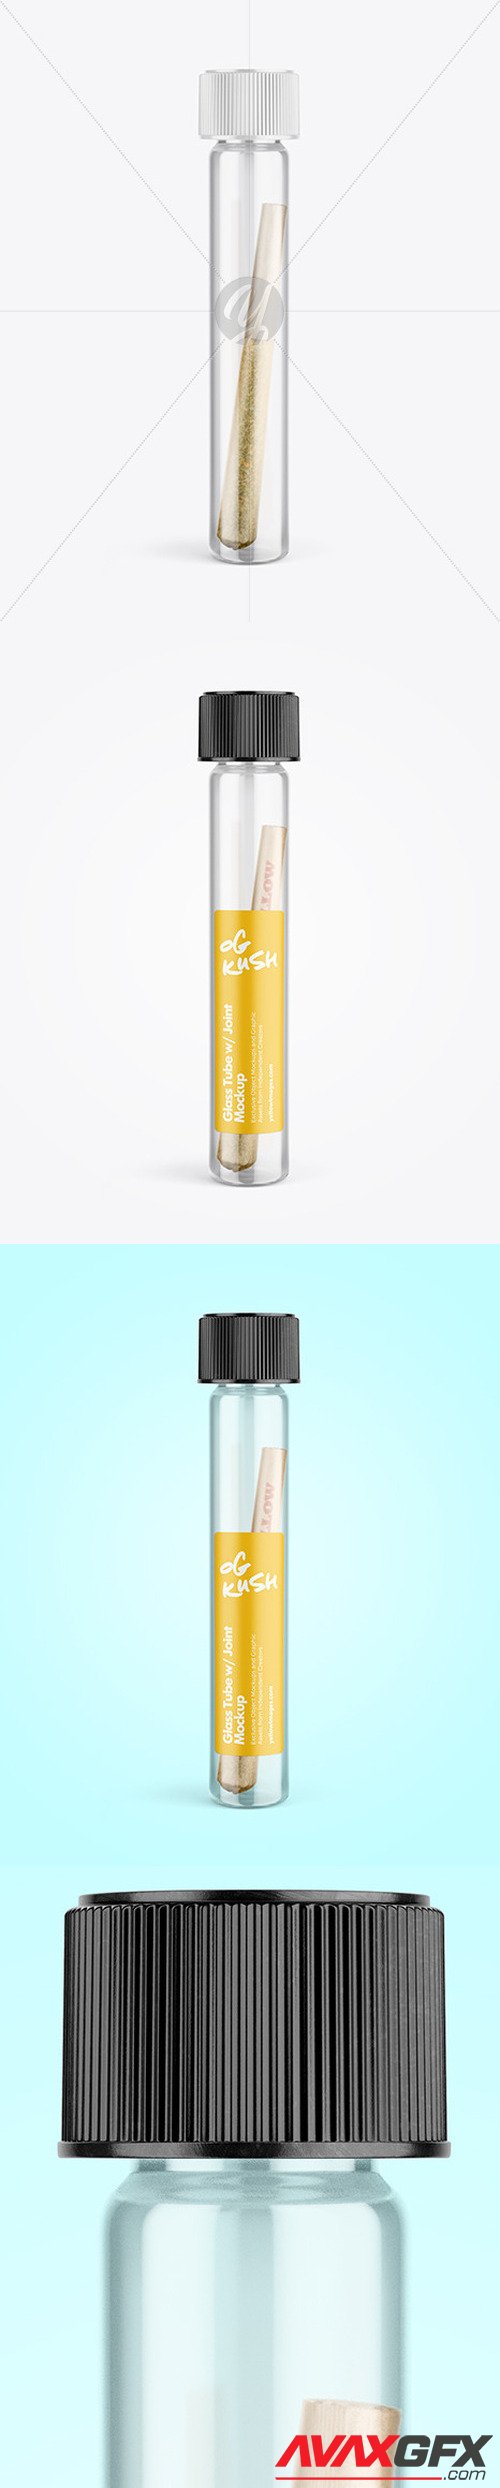 Glass Tube w/ Weed Joint Mockup 46104 [TIF]